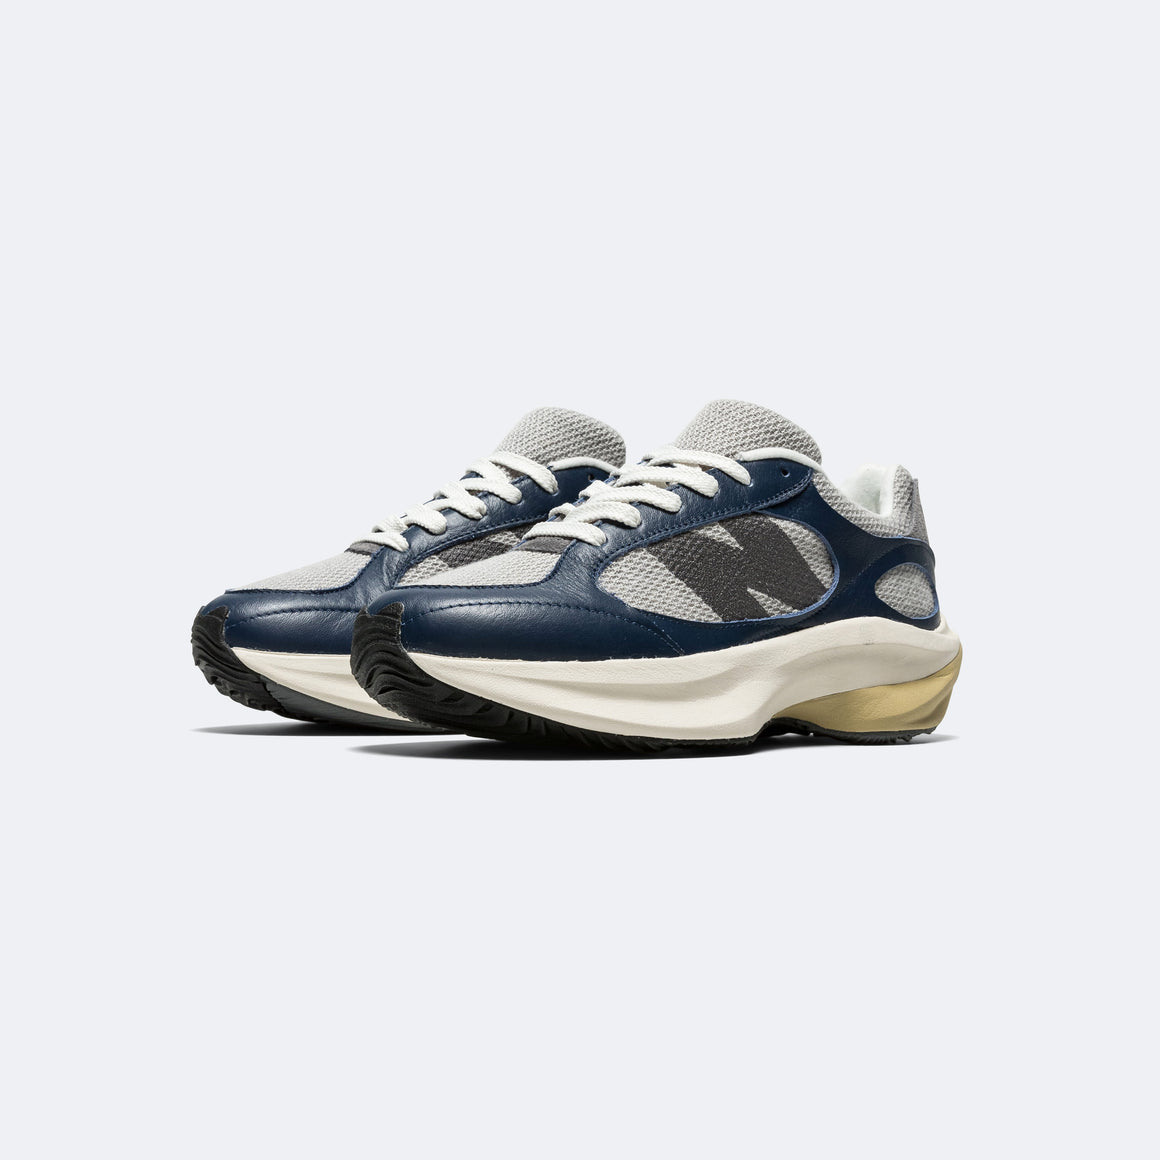 New Balance - WRPD RUNNER 'Leather Pack' - Navy - UP THERE